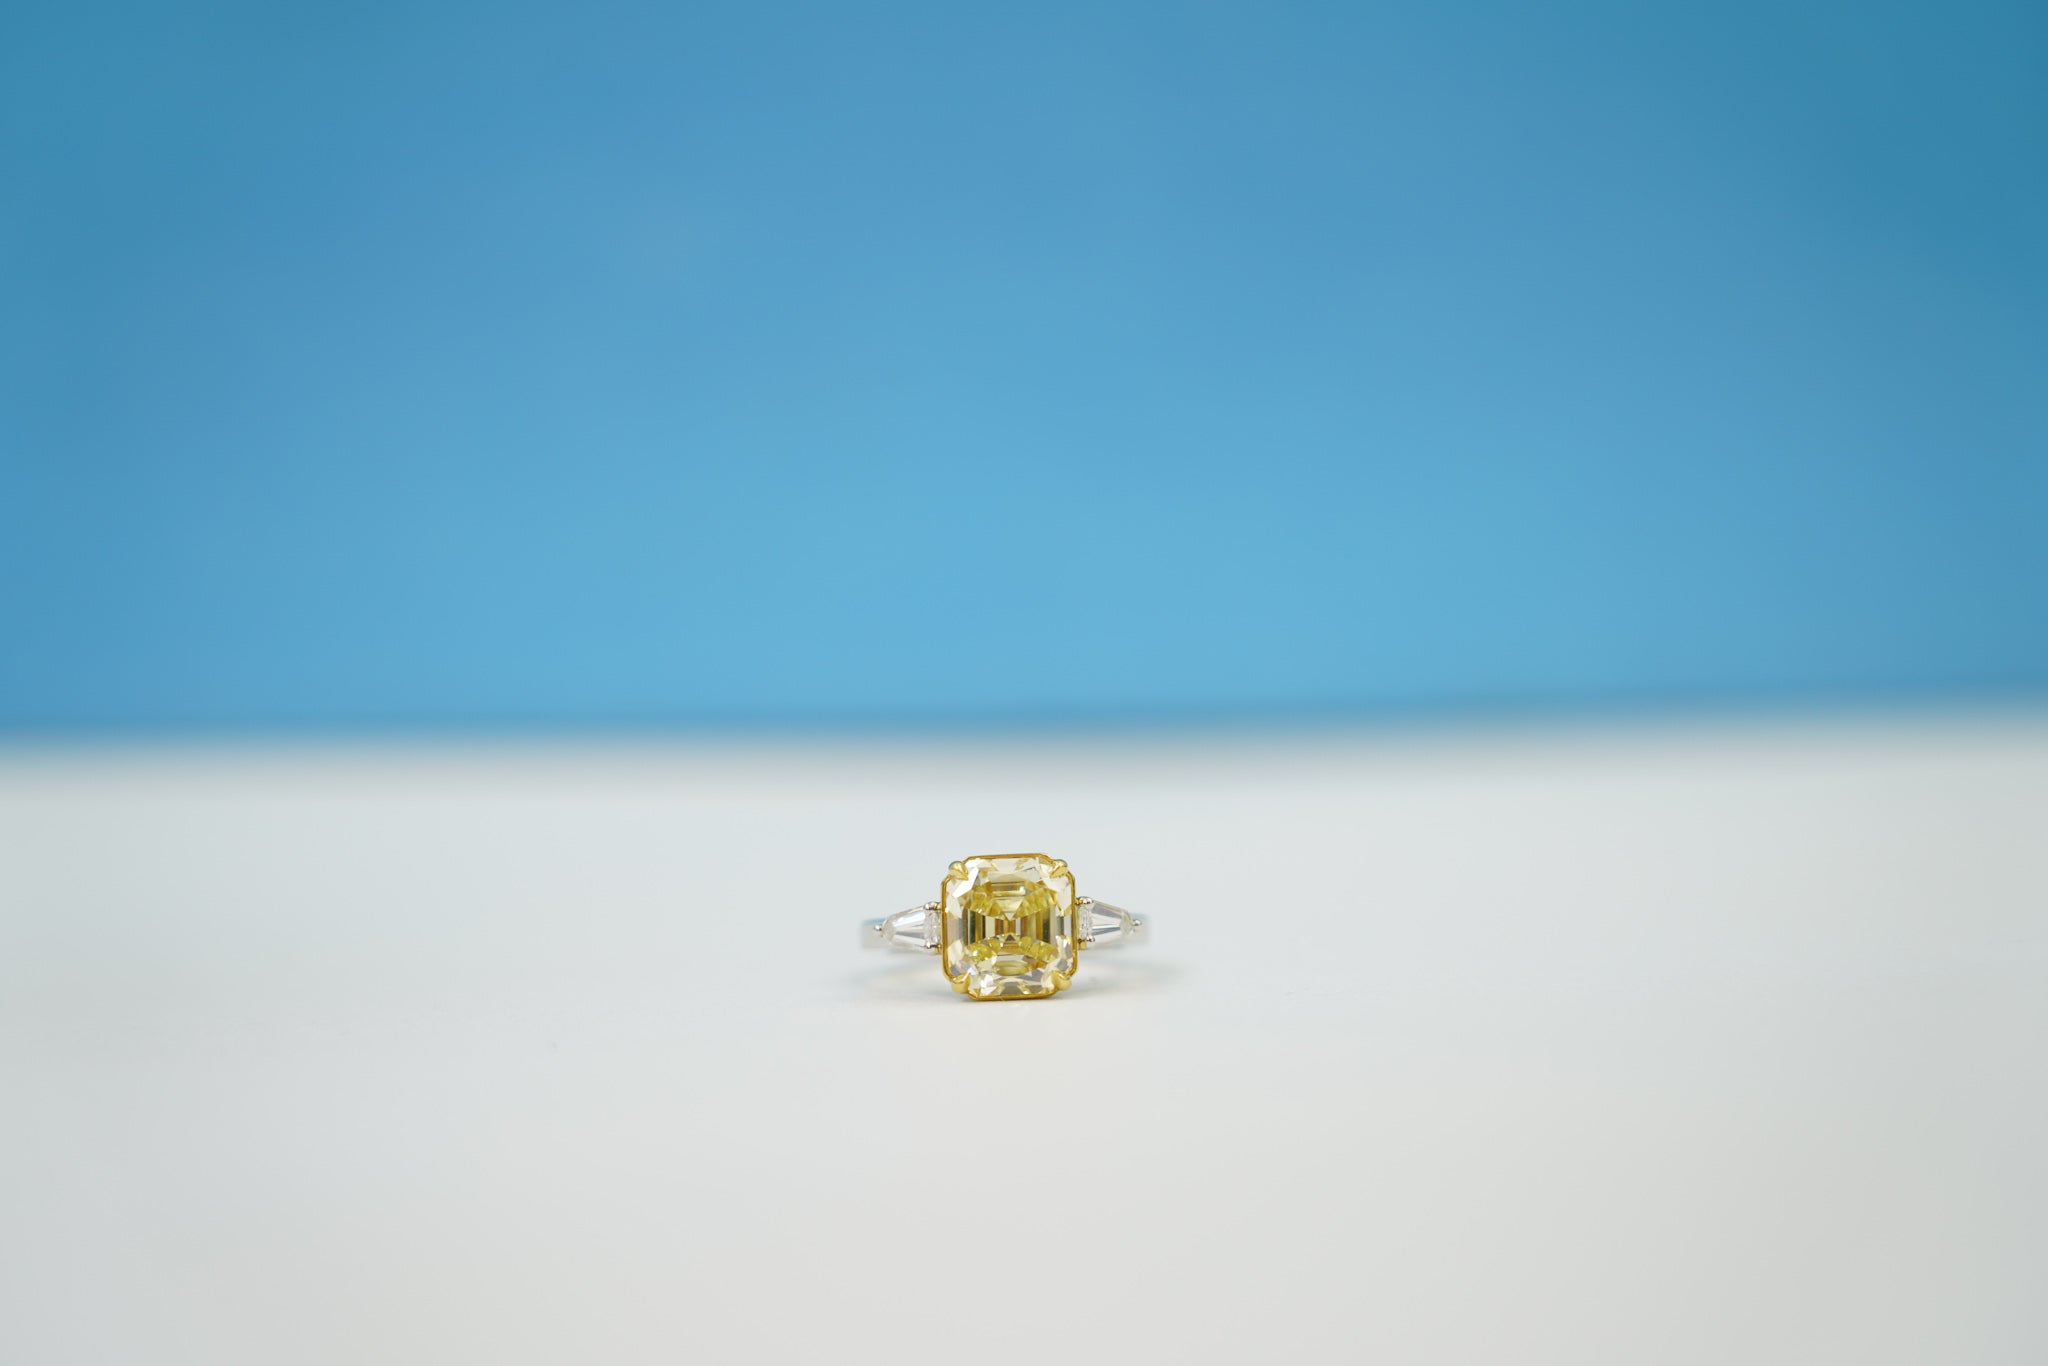 Custom Made 3.55 Carats Emerald Cut Fancy Yellow Diamond with .48 Carat Side Stones D/E VS Engagement Ring!